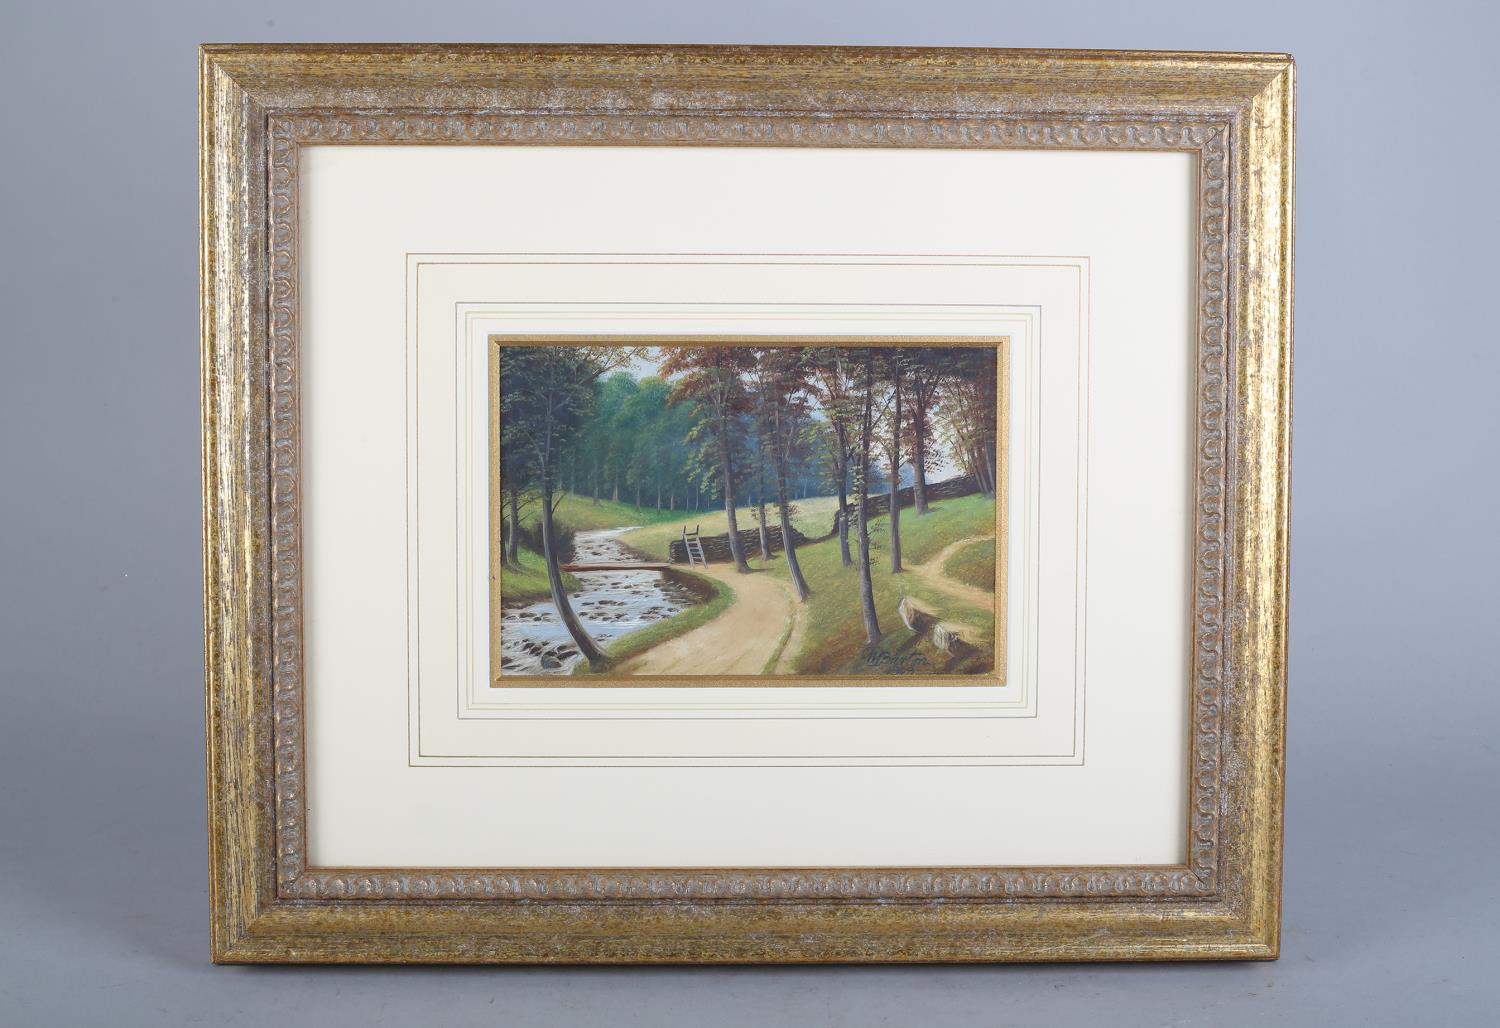 W* BARTON (mid 20th century), Riverside pathway with trees, oil on board, signed and dated 1909, - Image 2 of 4